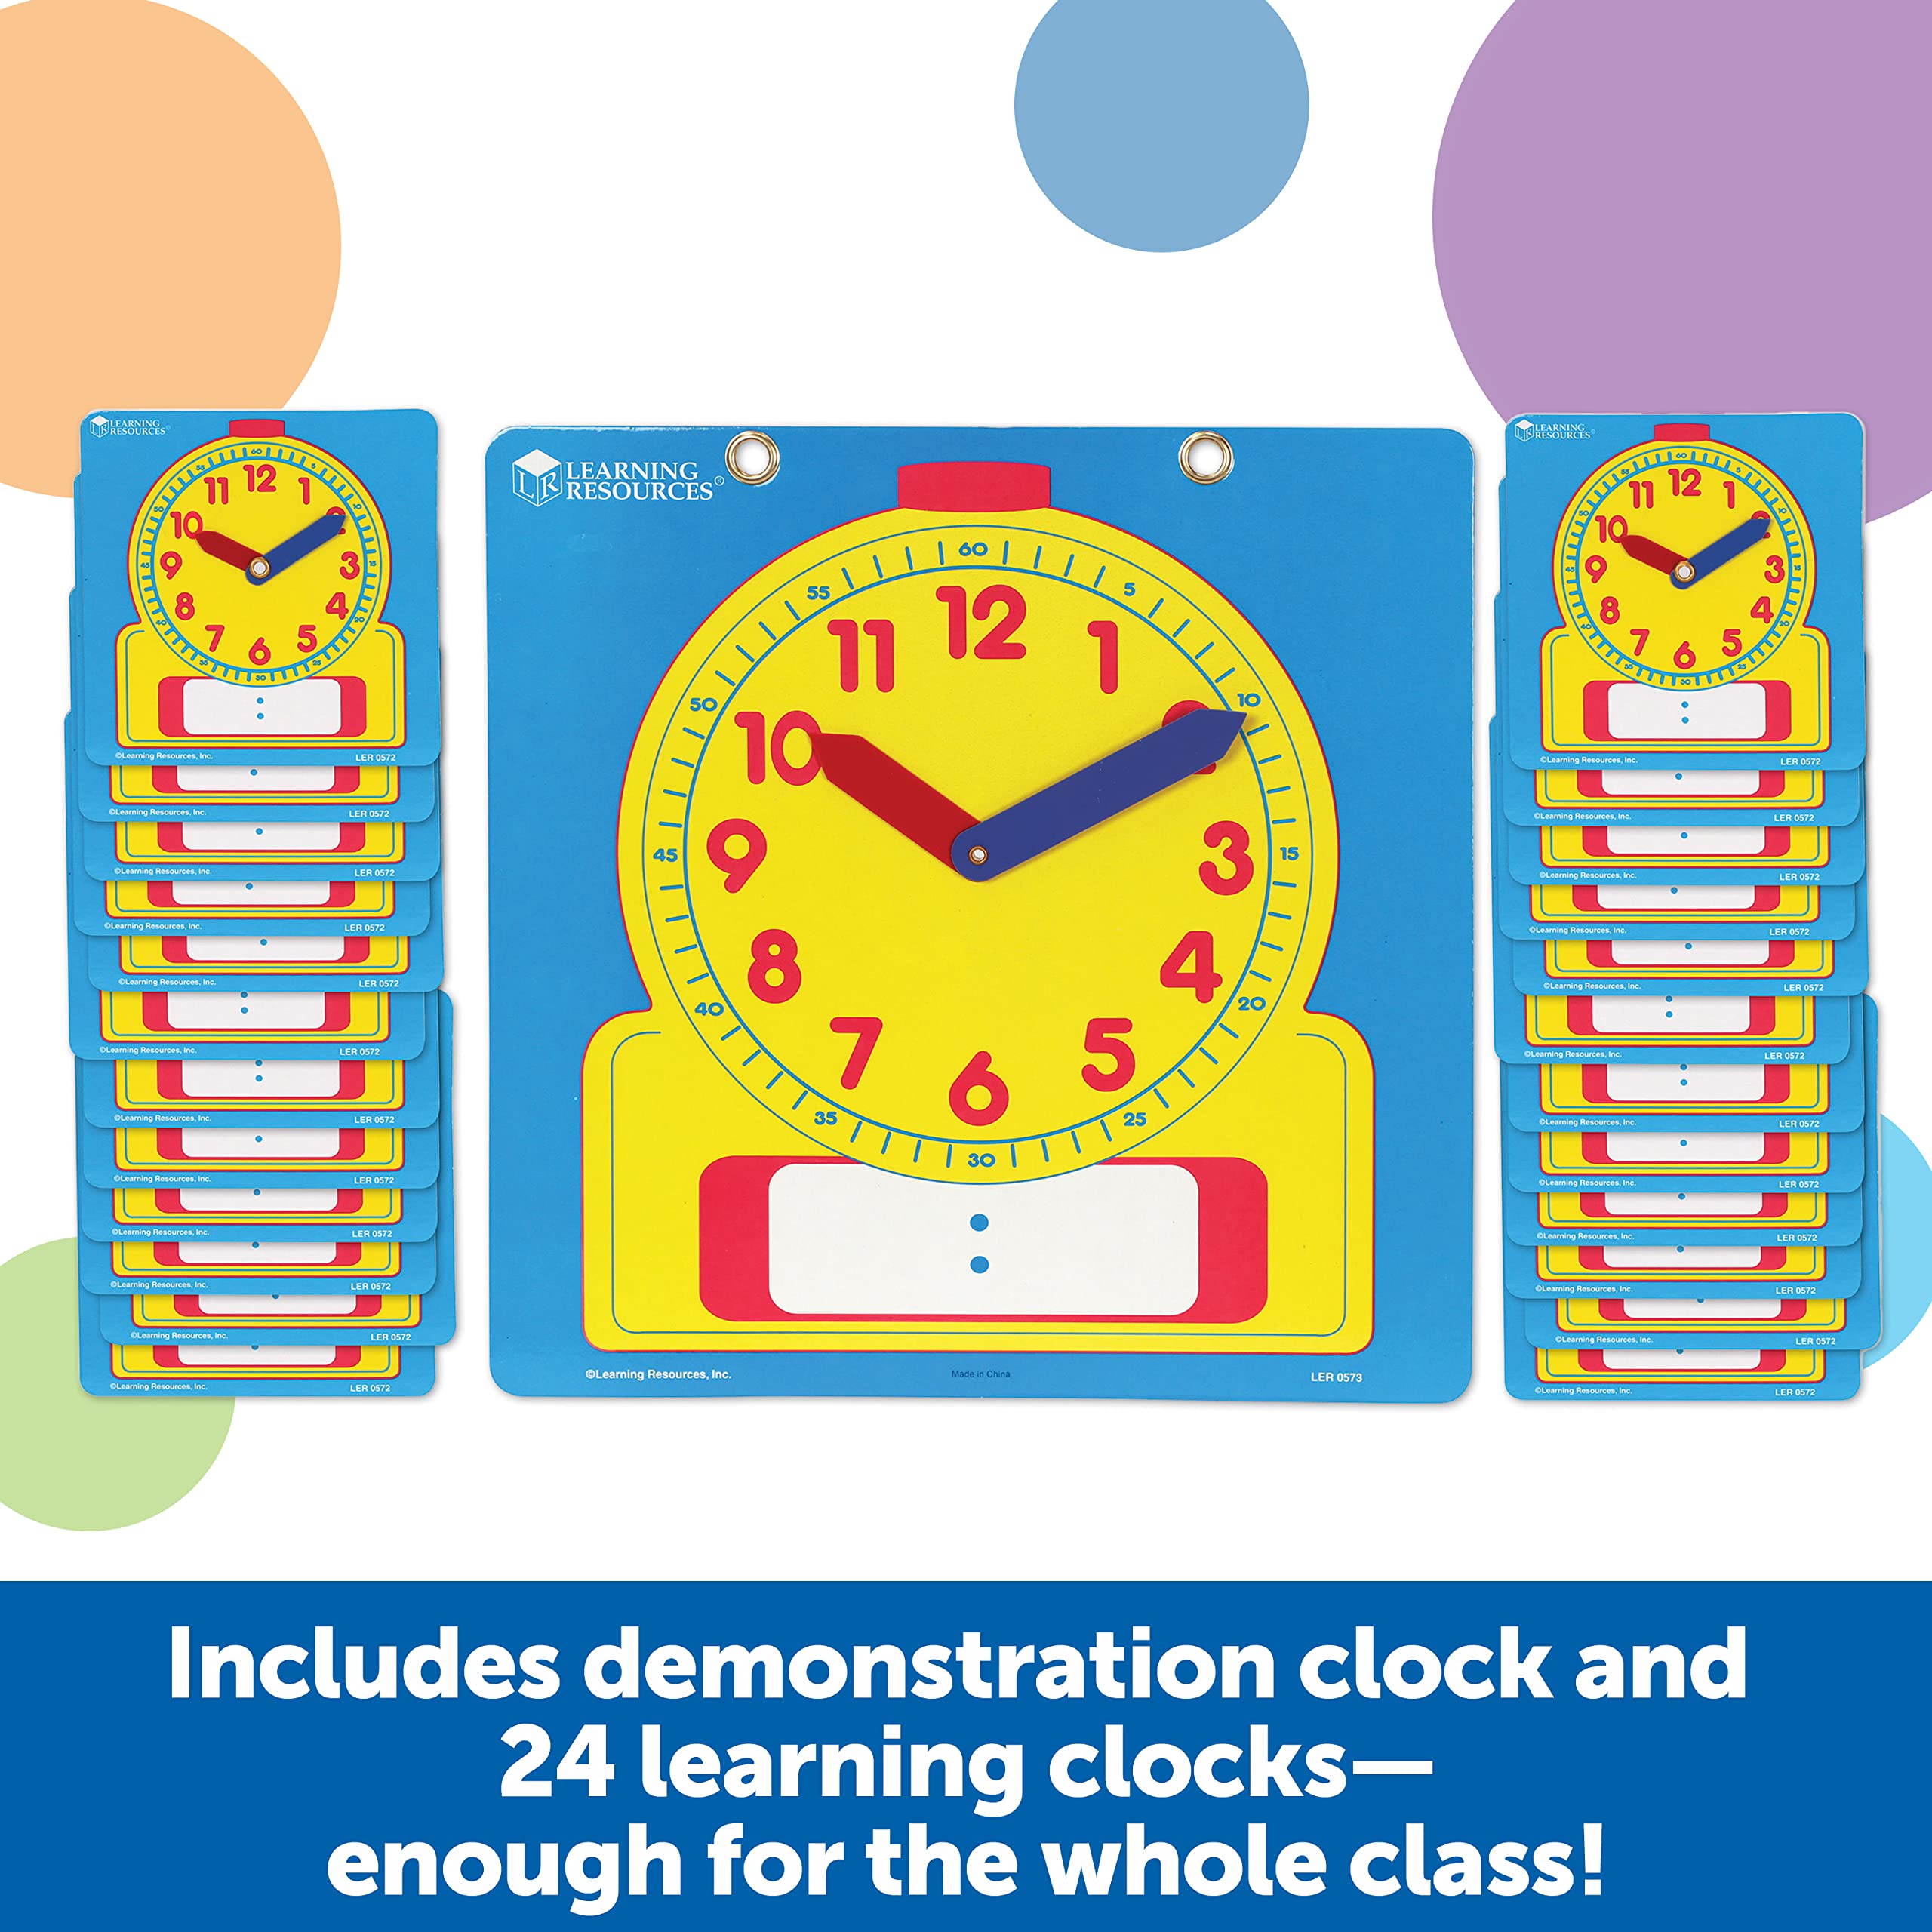 Learning Resources Write & Wipe Clocks Classroom Set - 25 Pieces, Ages 6+ Laminated Dry-Erase, Teaching Aids, Teacher Supplies, Learning Time,Back to School Supplies